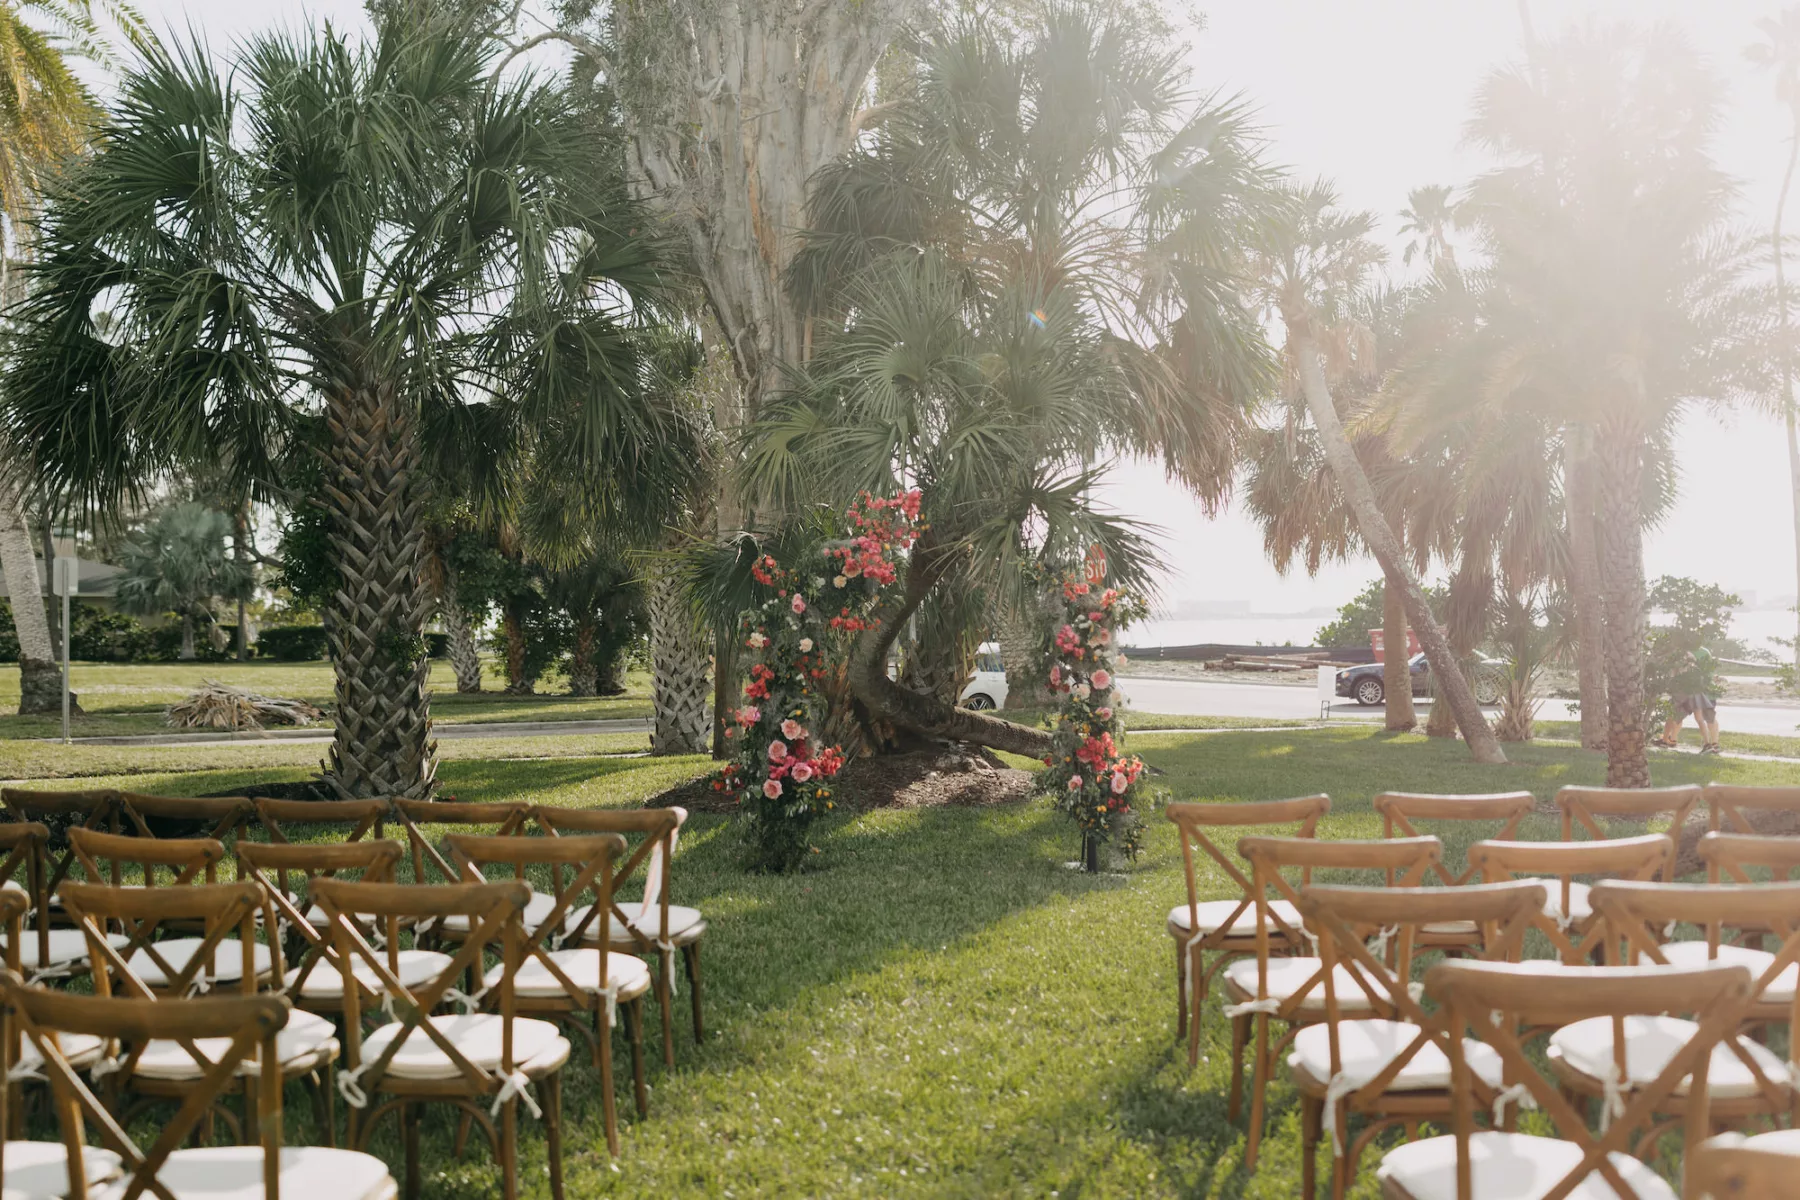 Old Florida Outdoor Wedding Ceremony Decor Ideas | Wooden Crossback Chairs with Cushions Inspiration | Tampa Bay Event Planner Coastal Coordinating | Dunedin Venue The Fenway